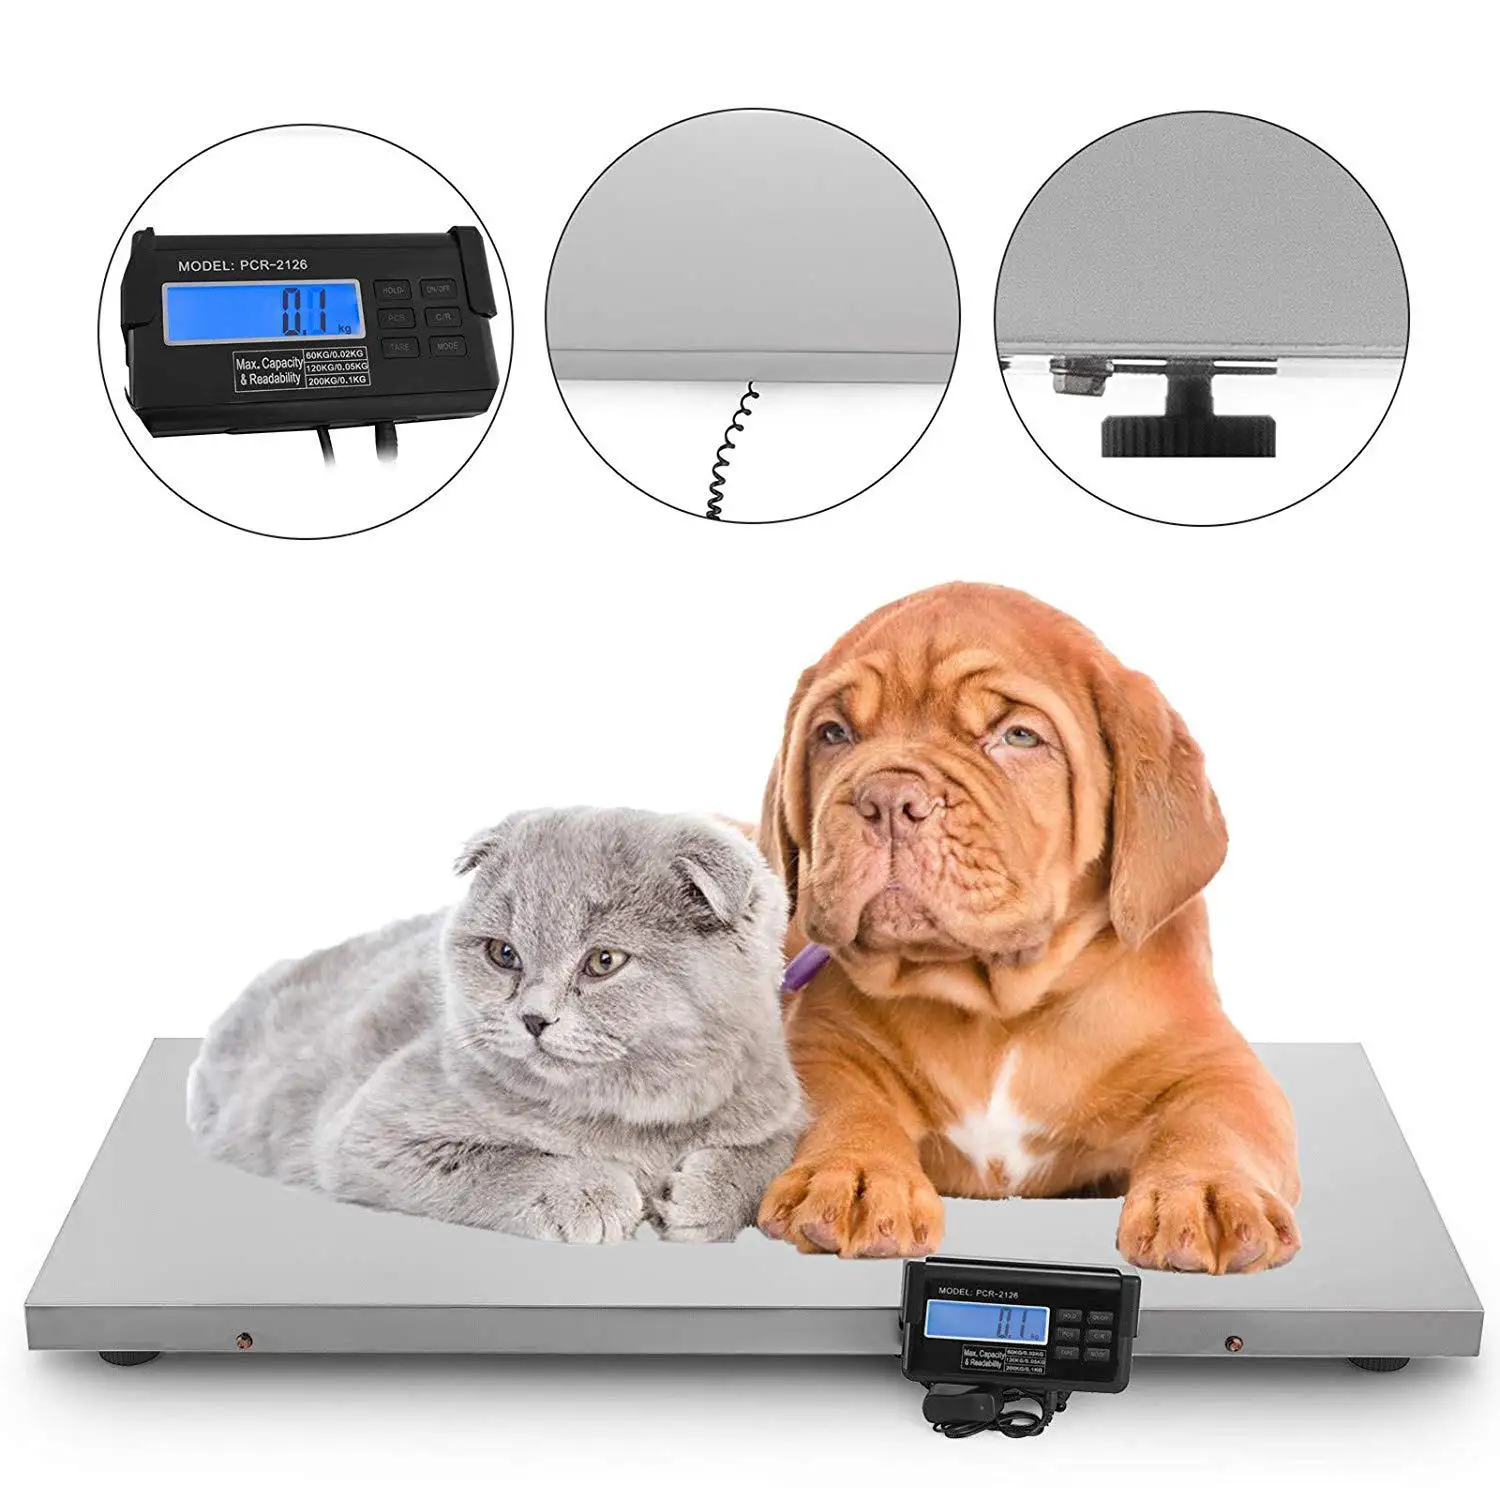 100KG-0.01KG Multi-purpose Parcel Post Electronics Says Express Says Pets Call Hidden Electronic Table Scale Seine Gold Diamond